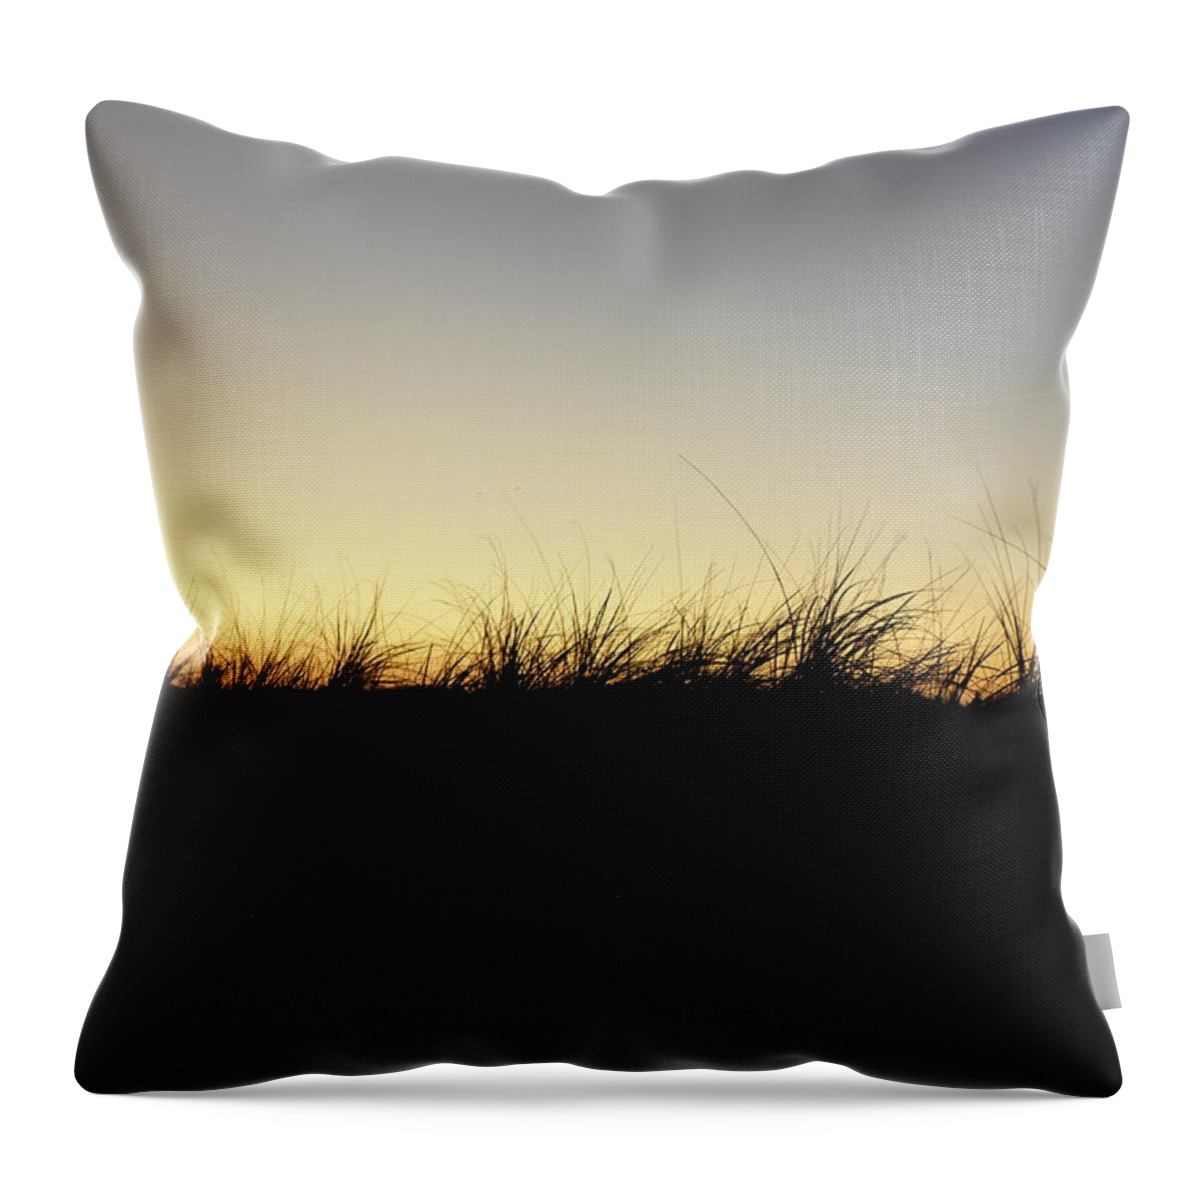 Seagrass Throw Pillow featuring the photograph Just A Touch by Kim Galluzzo Wozniak